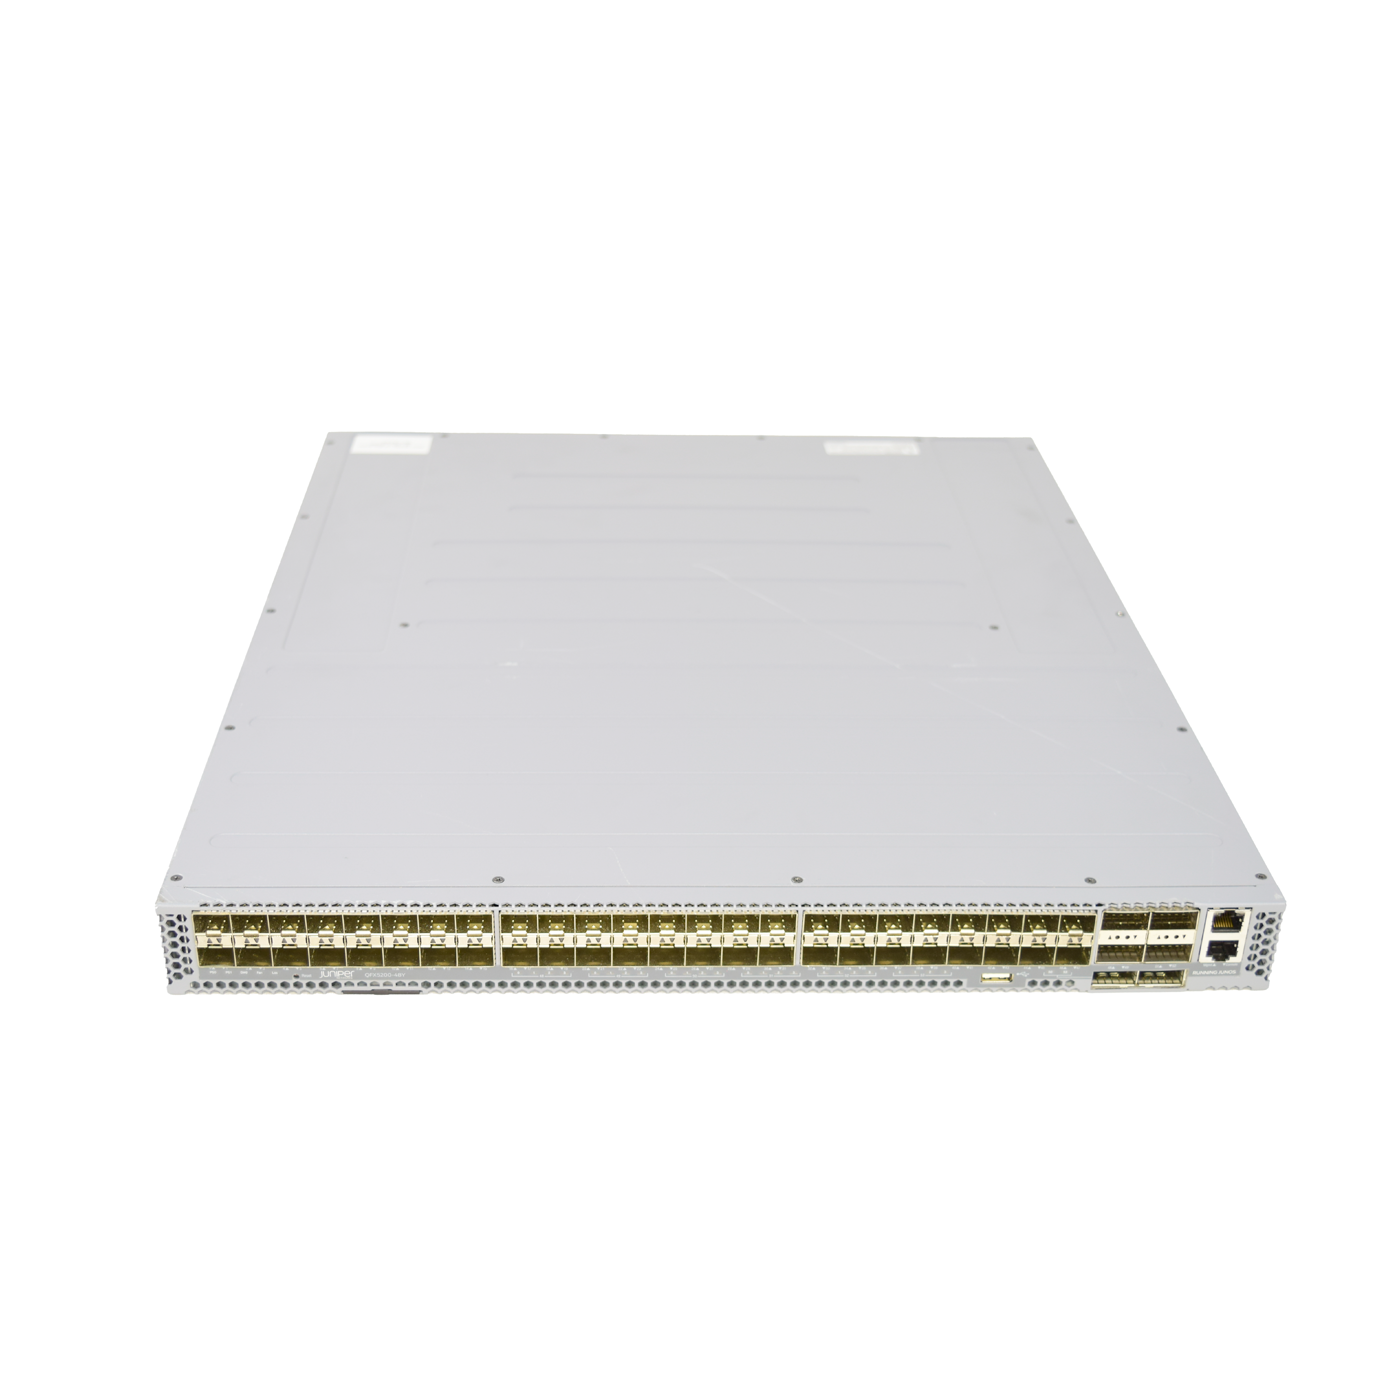 Juniper QFX5200-48Y-AFI 48 SFP+/SFP28 ports, back-to-front airflow switch